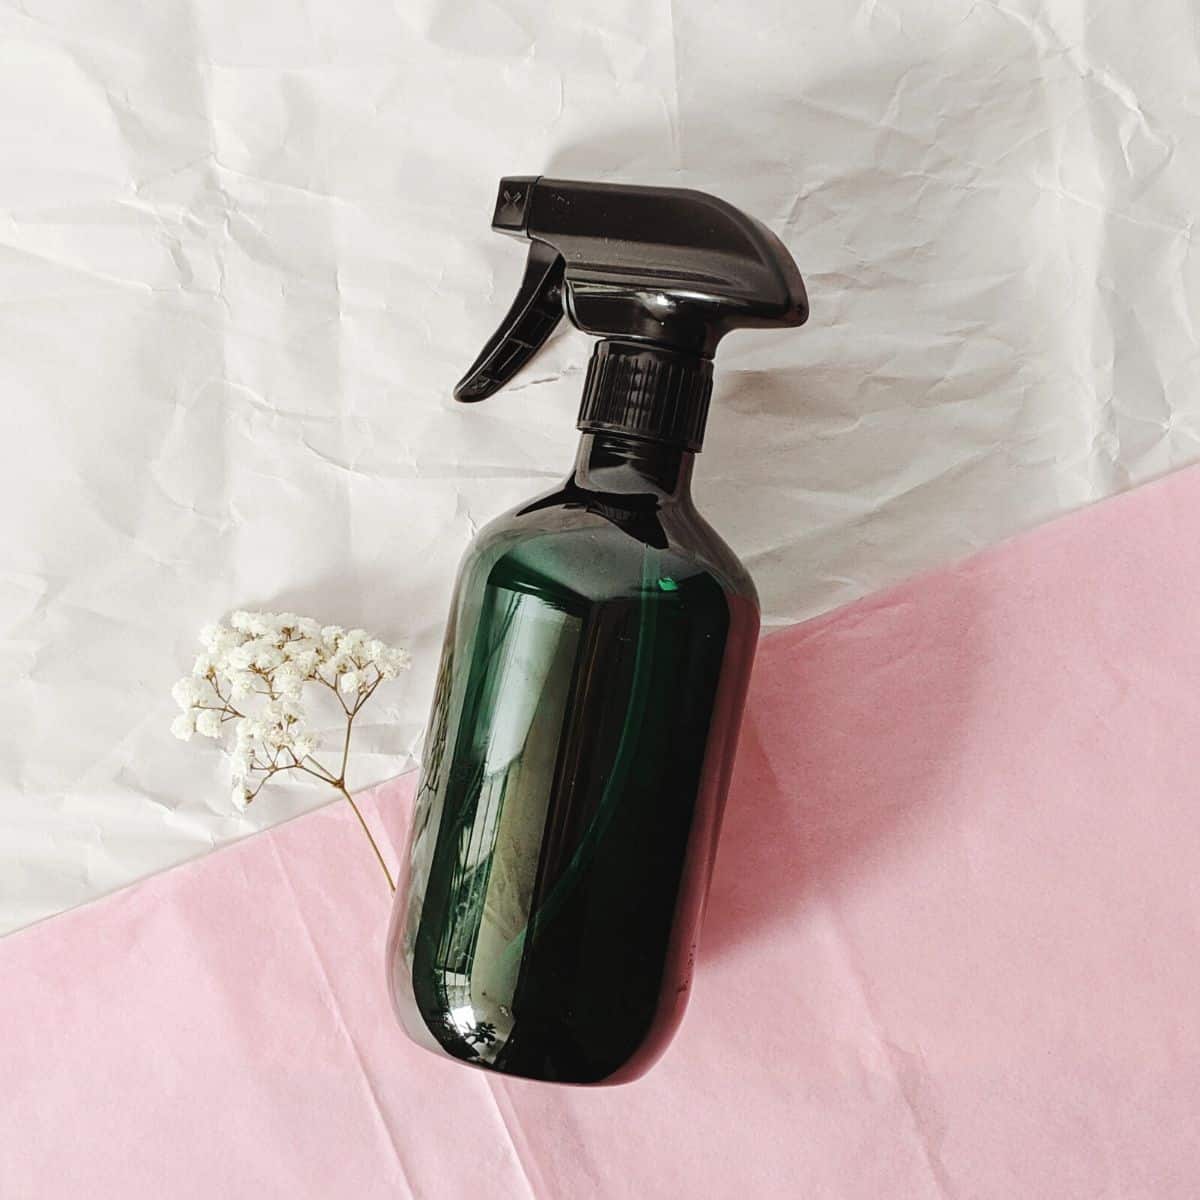 How to Make a Natural Disinfectant Spray